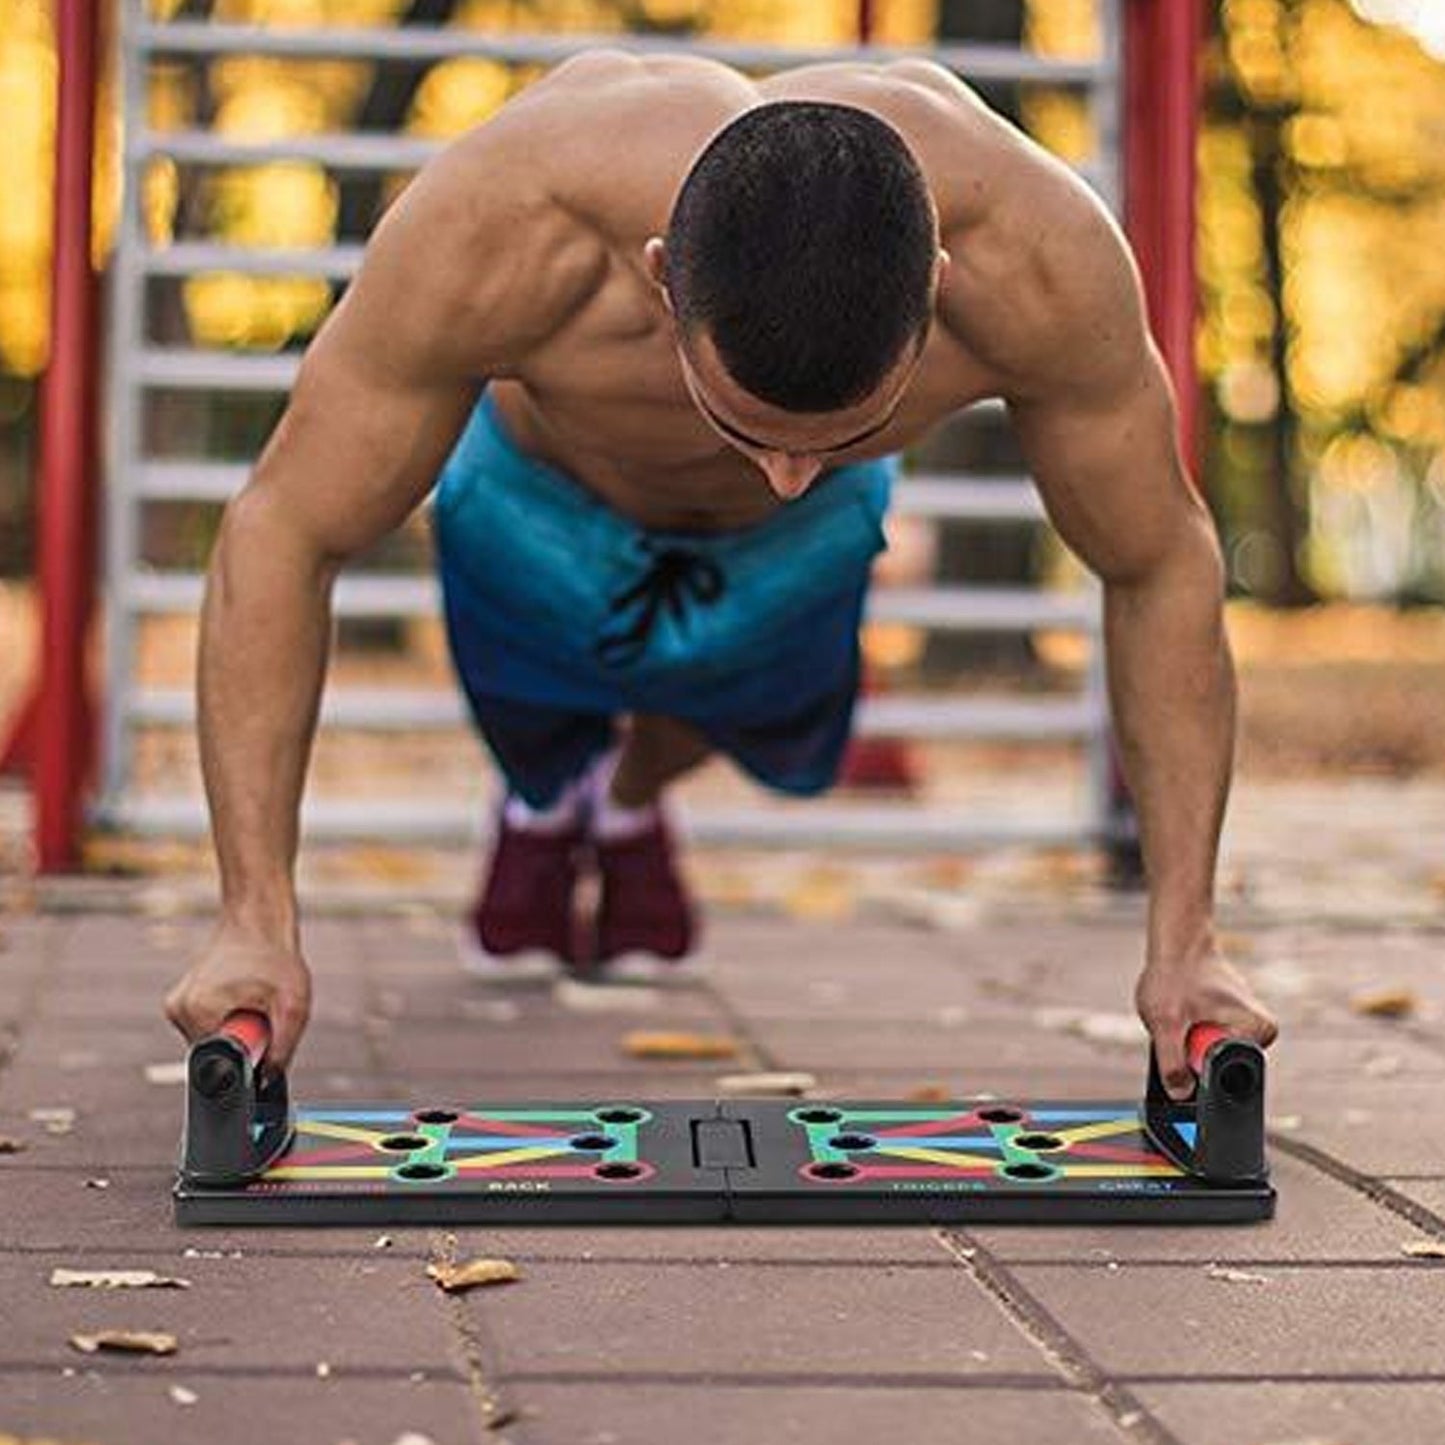 6650  Body Building Portable Push Up Board System with Strong Grip Handle for Chest Press, Gym & Home Exercise, Strength Training, Dips/Push Up Stand for Men & Women DeoDap